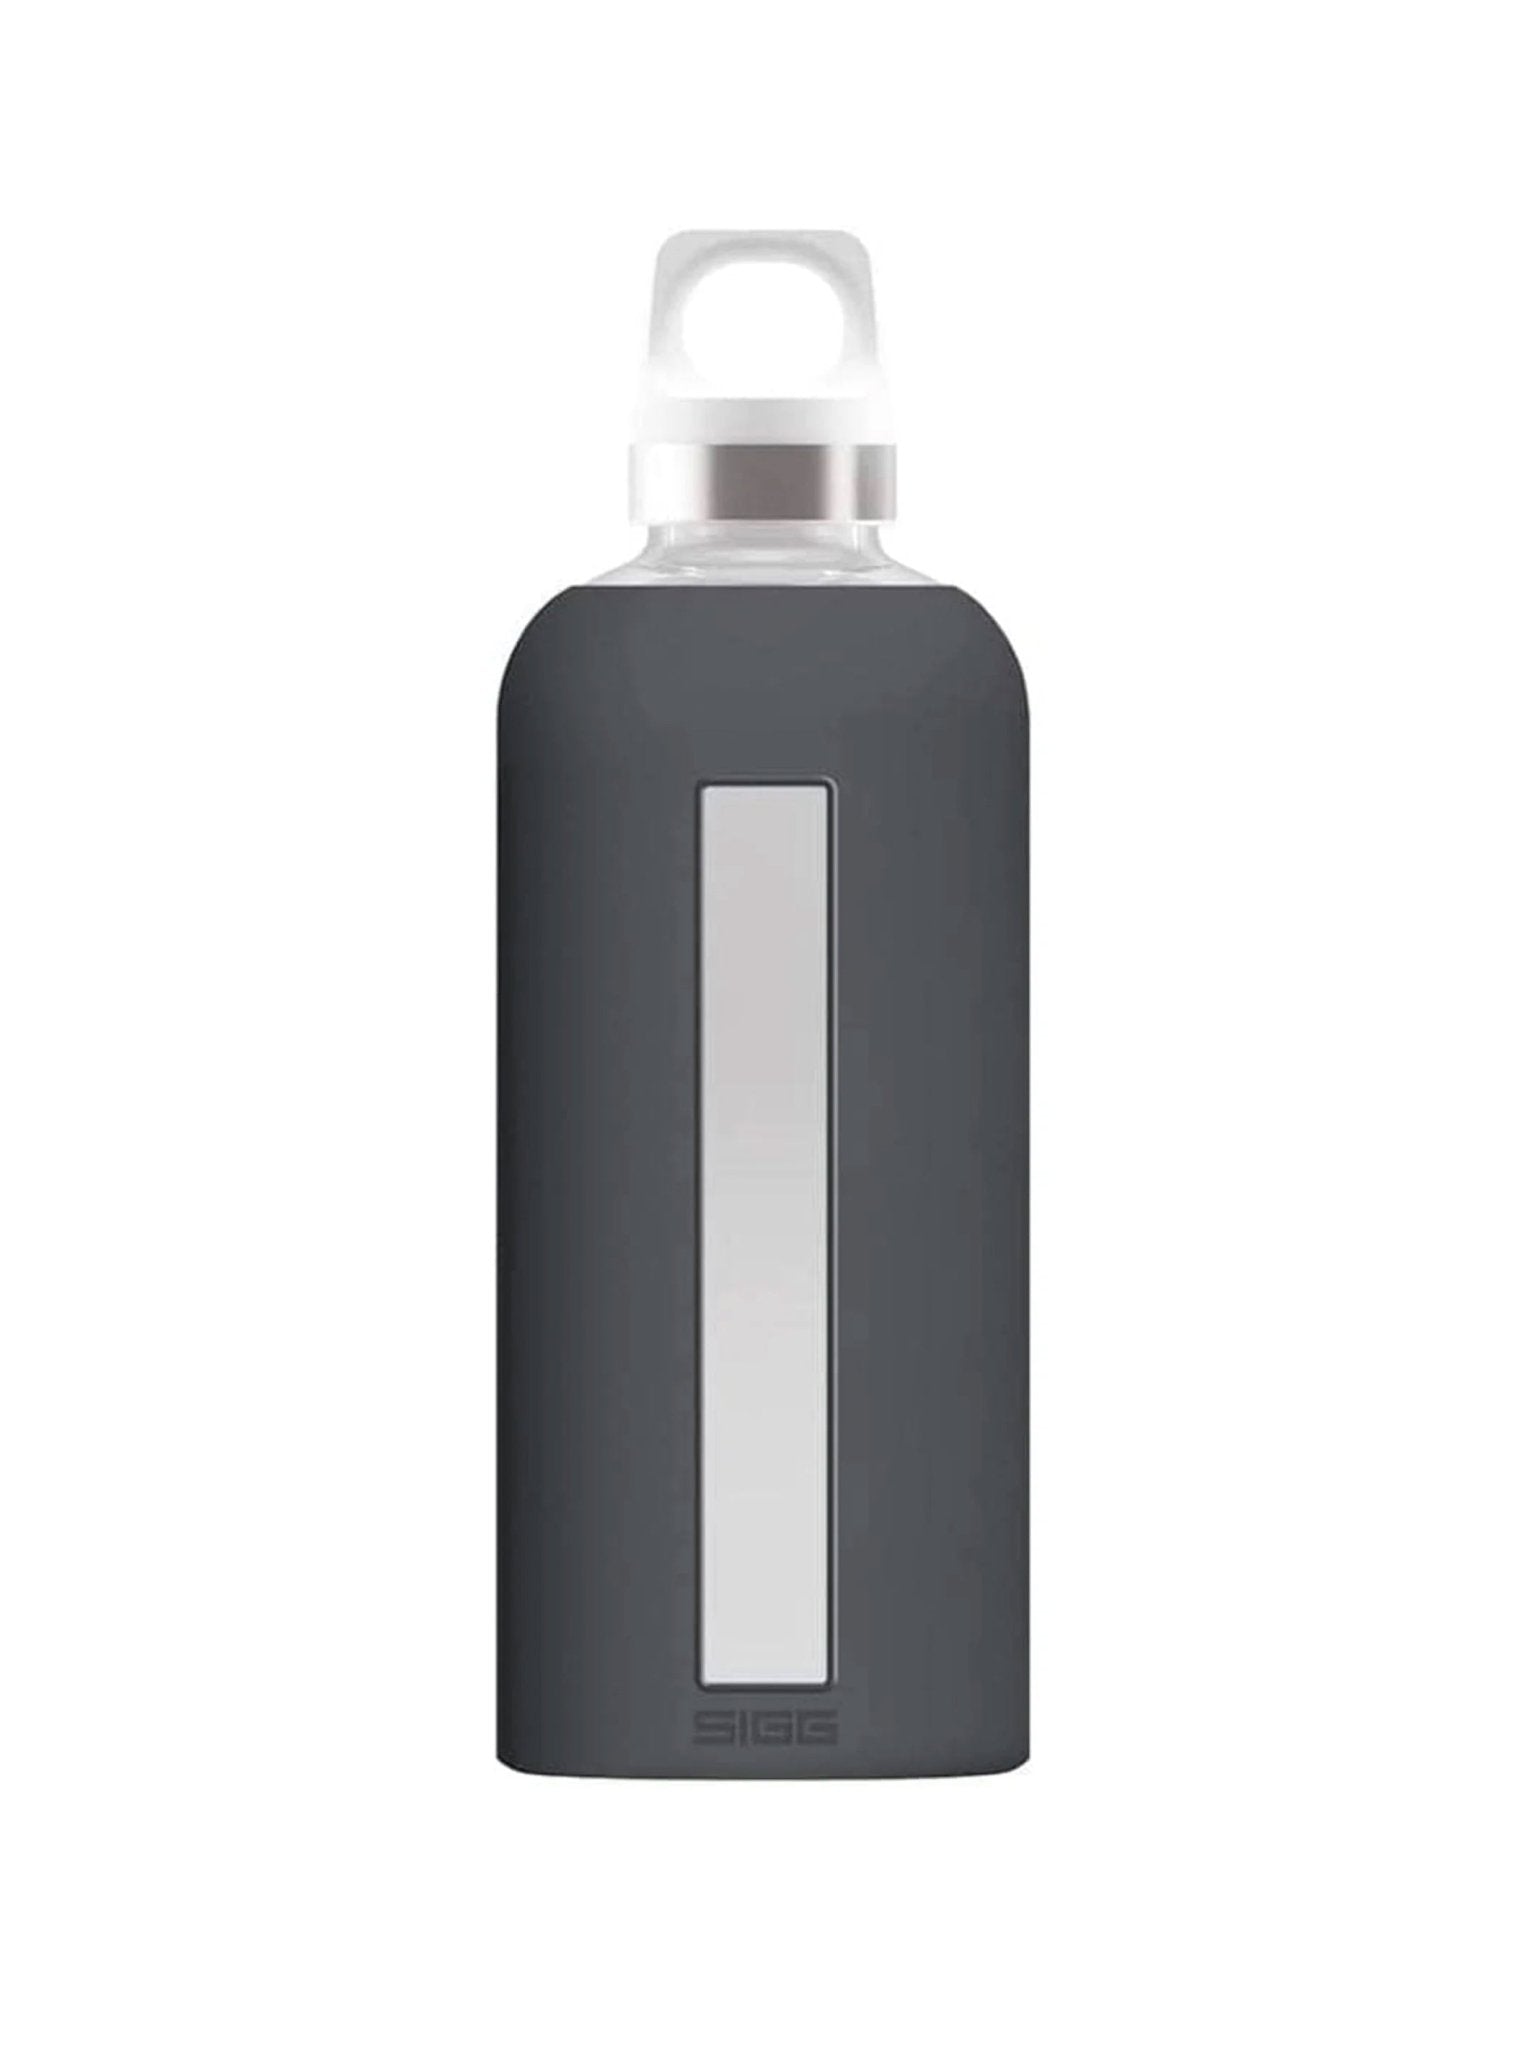 4elementsclothingSiggSIGG - Star Water Bottle, Leak-Proof Glass Bottle, Heat-Resistant with Silicone CaseWater Bottles8649.50